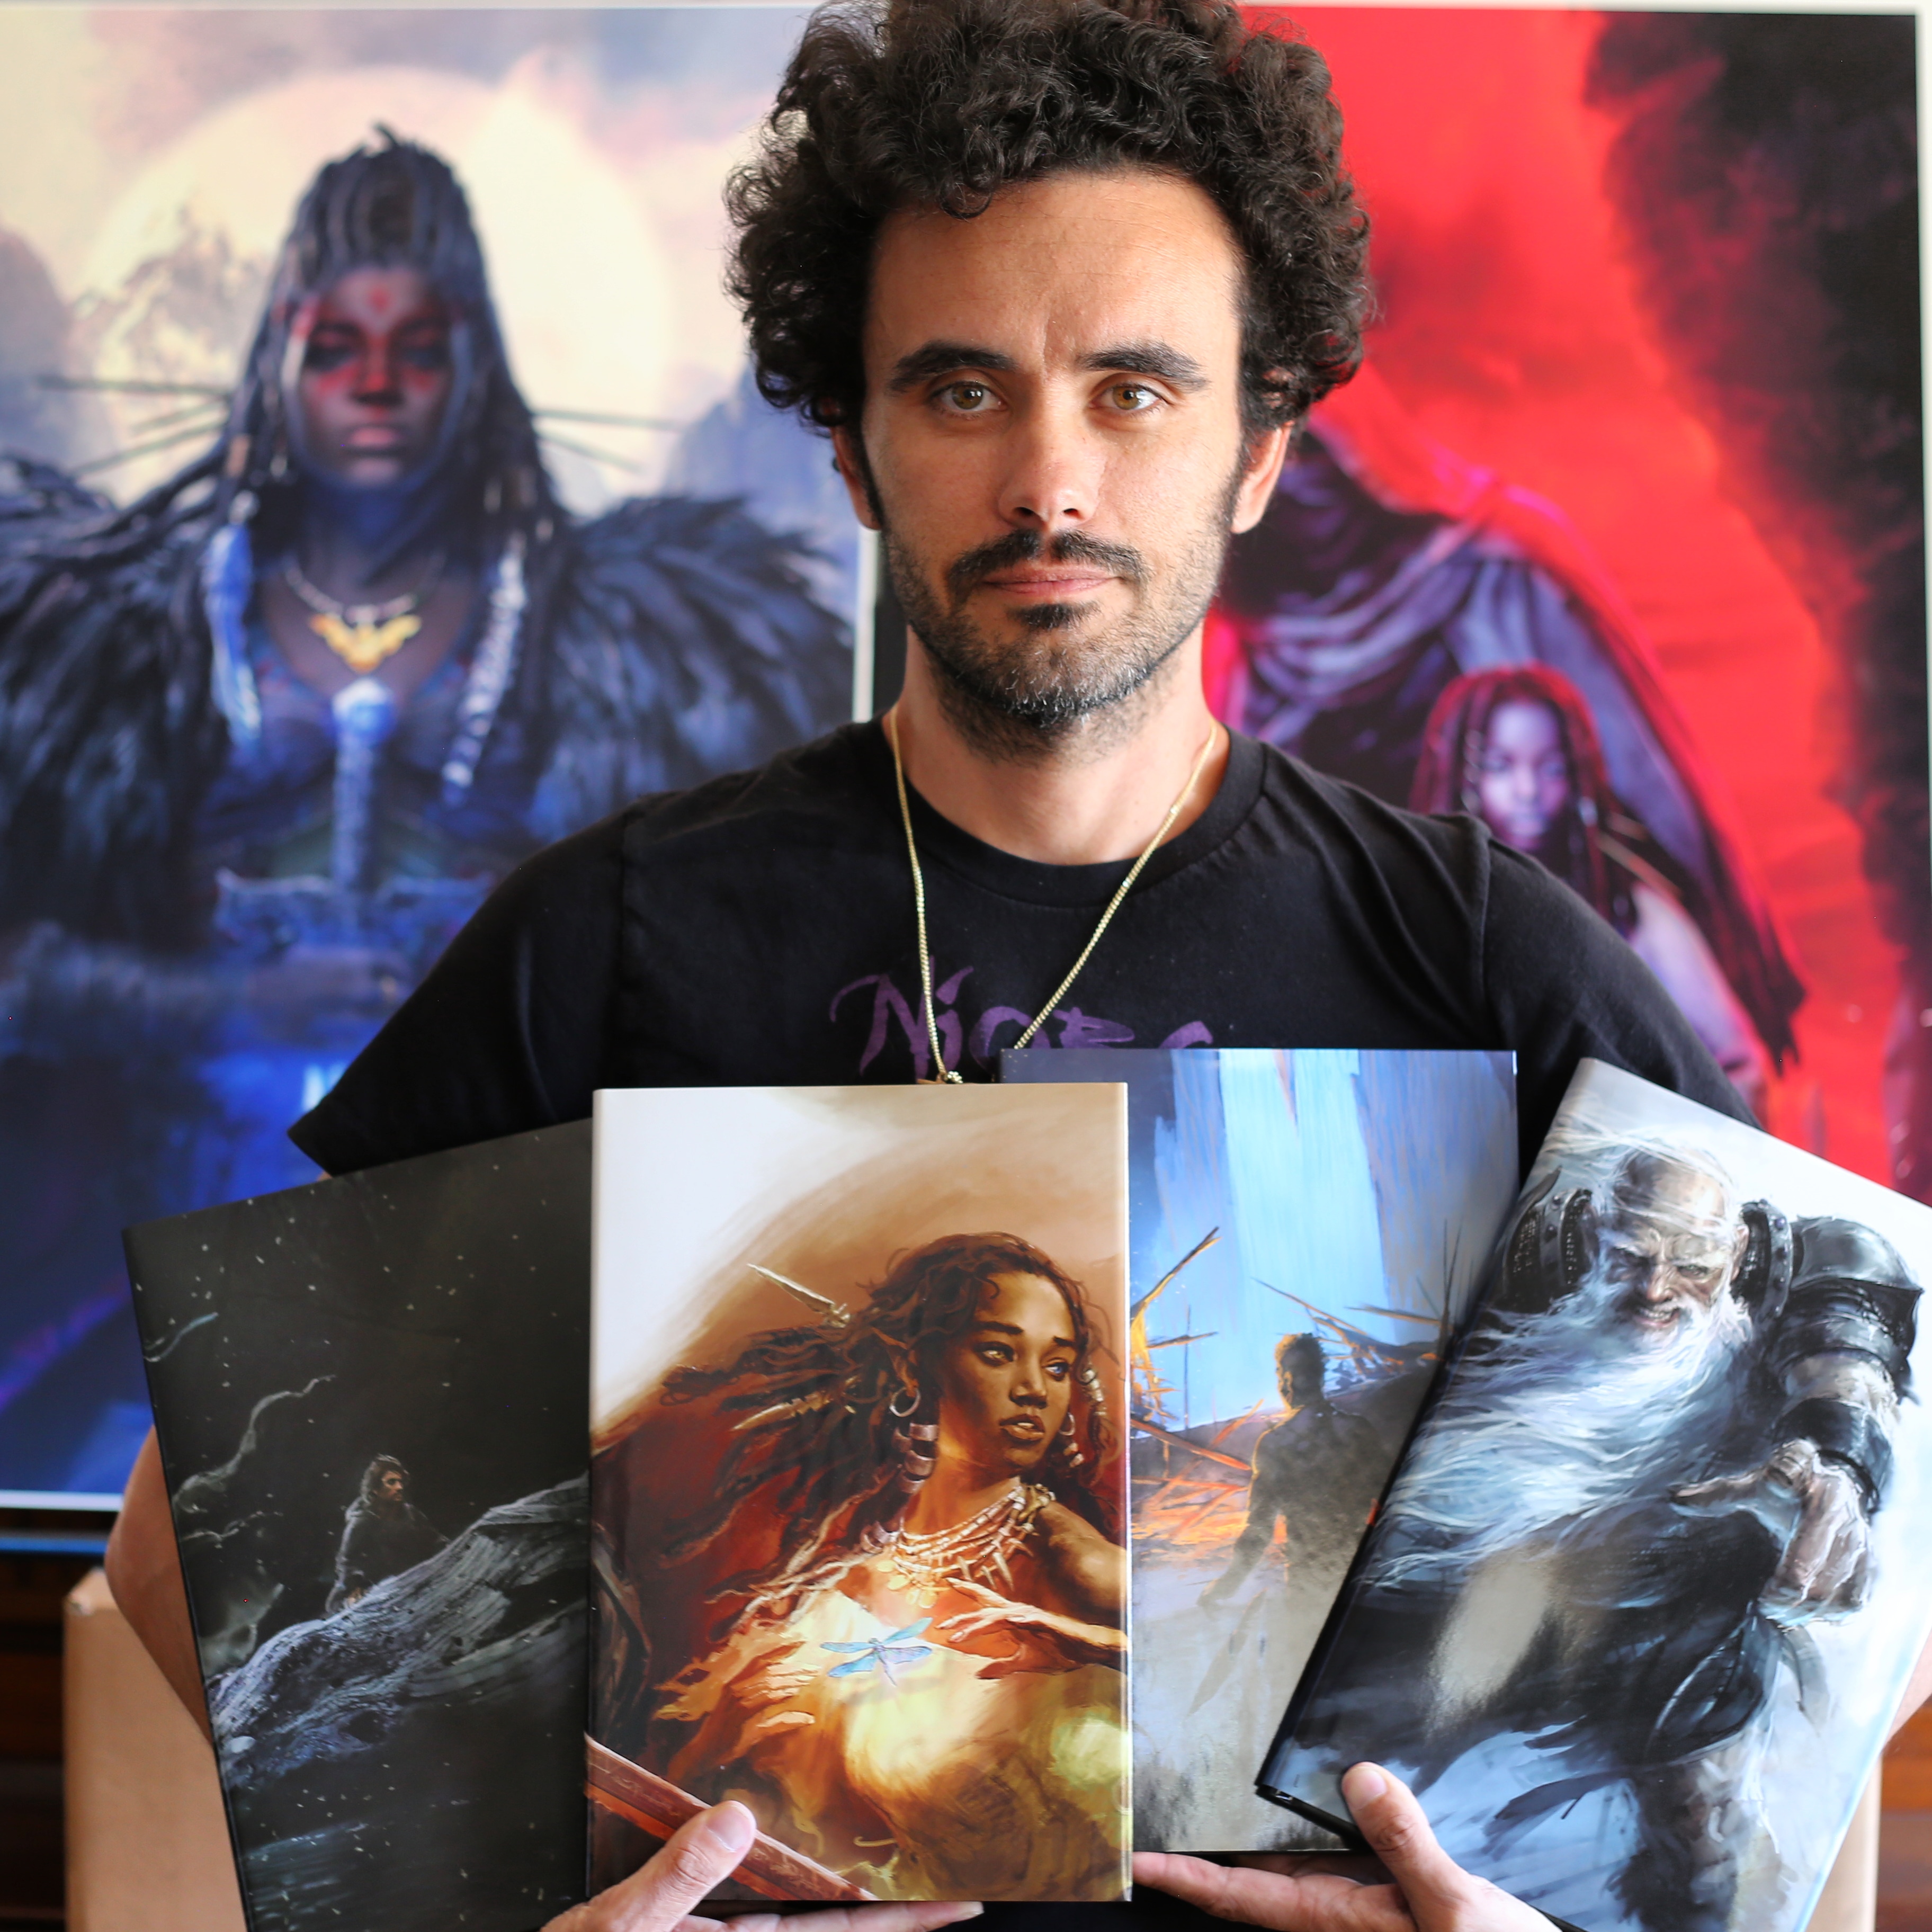 Photo of Sebastian Jones holding four of his books. In the background are large posters of his character Niobe